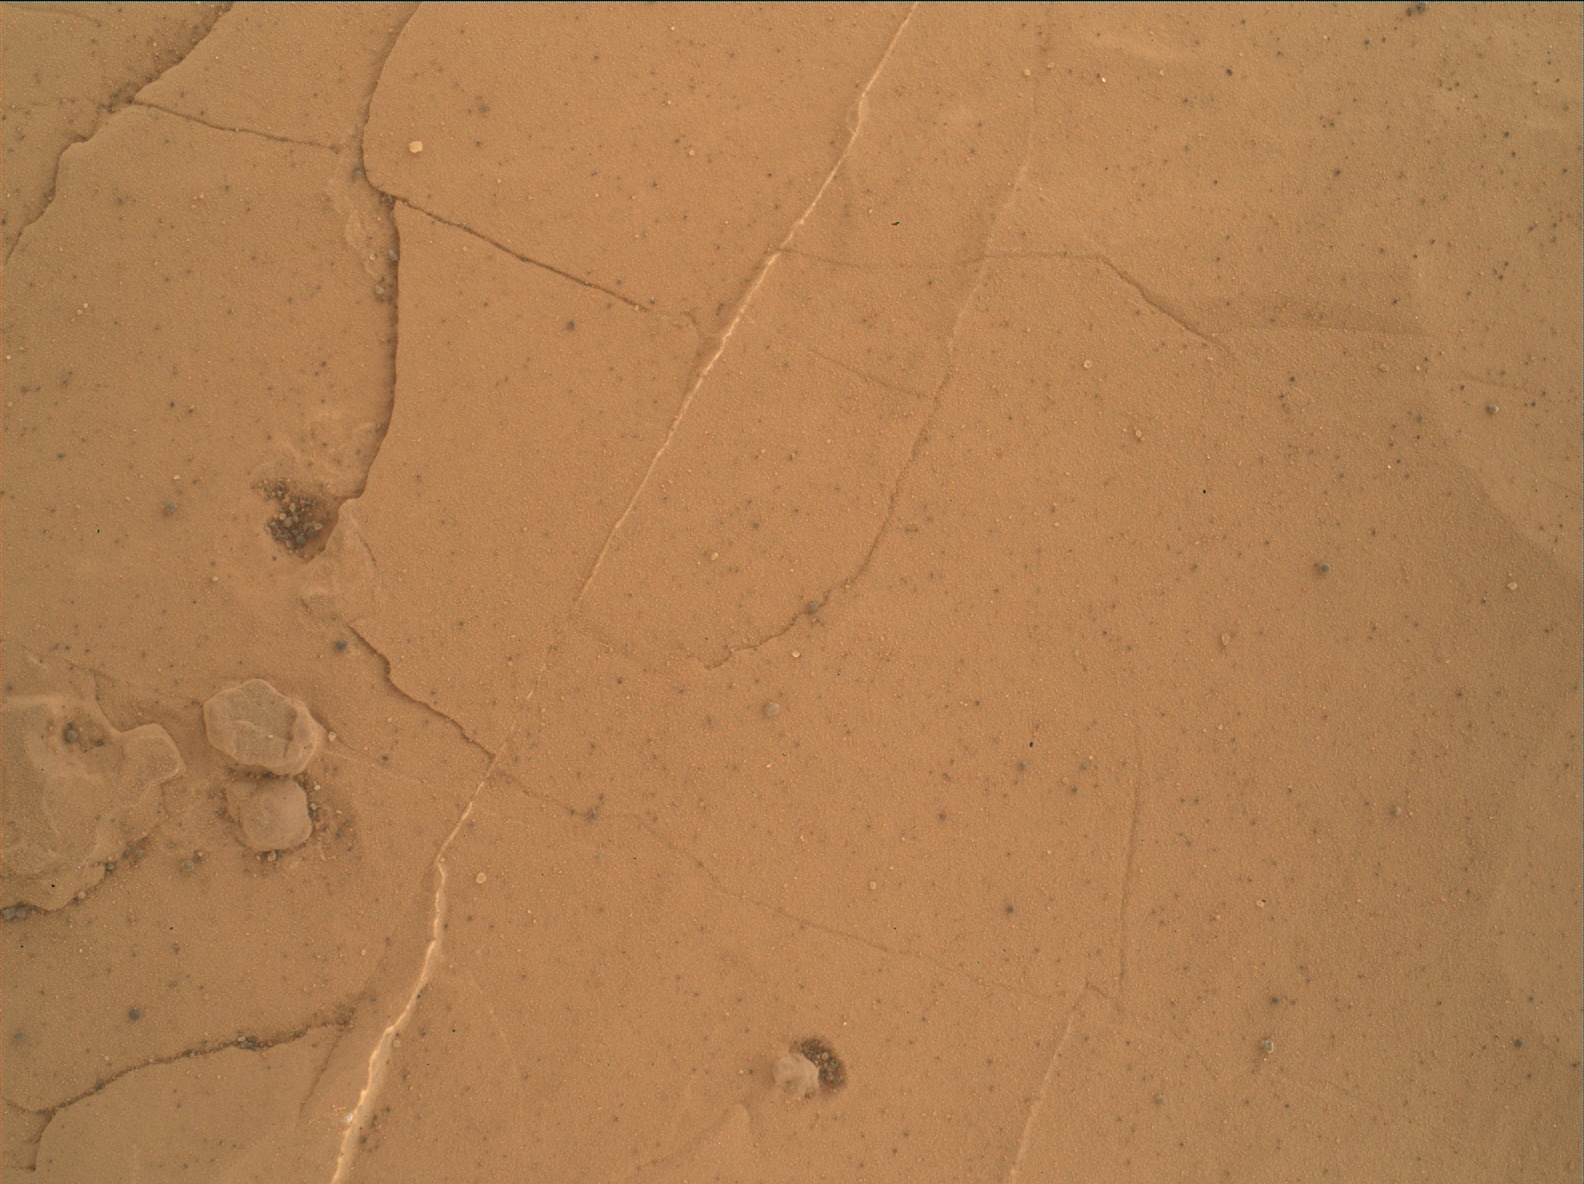 Nasa's Mars rover Curiosity acquired this image using its Mars Hand Lens Imager (MAHLI) on Sol 1795